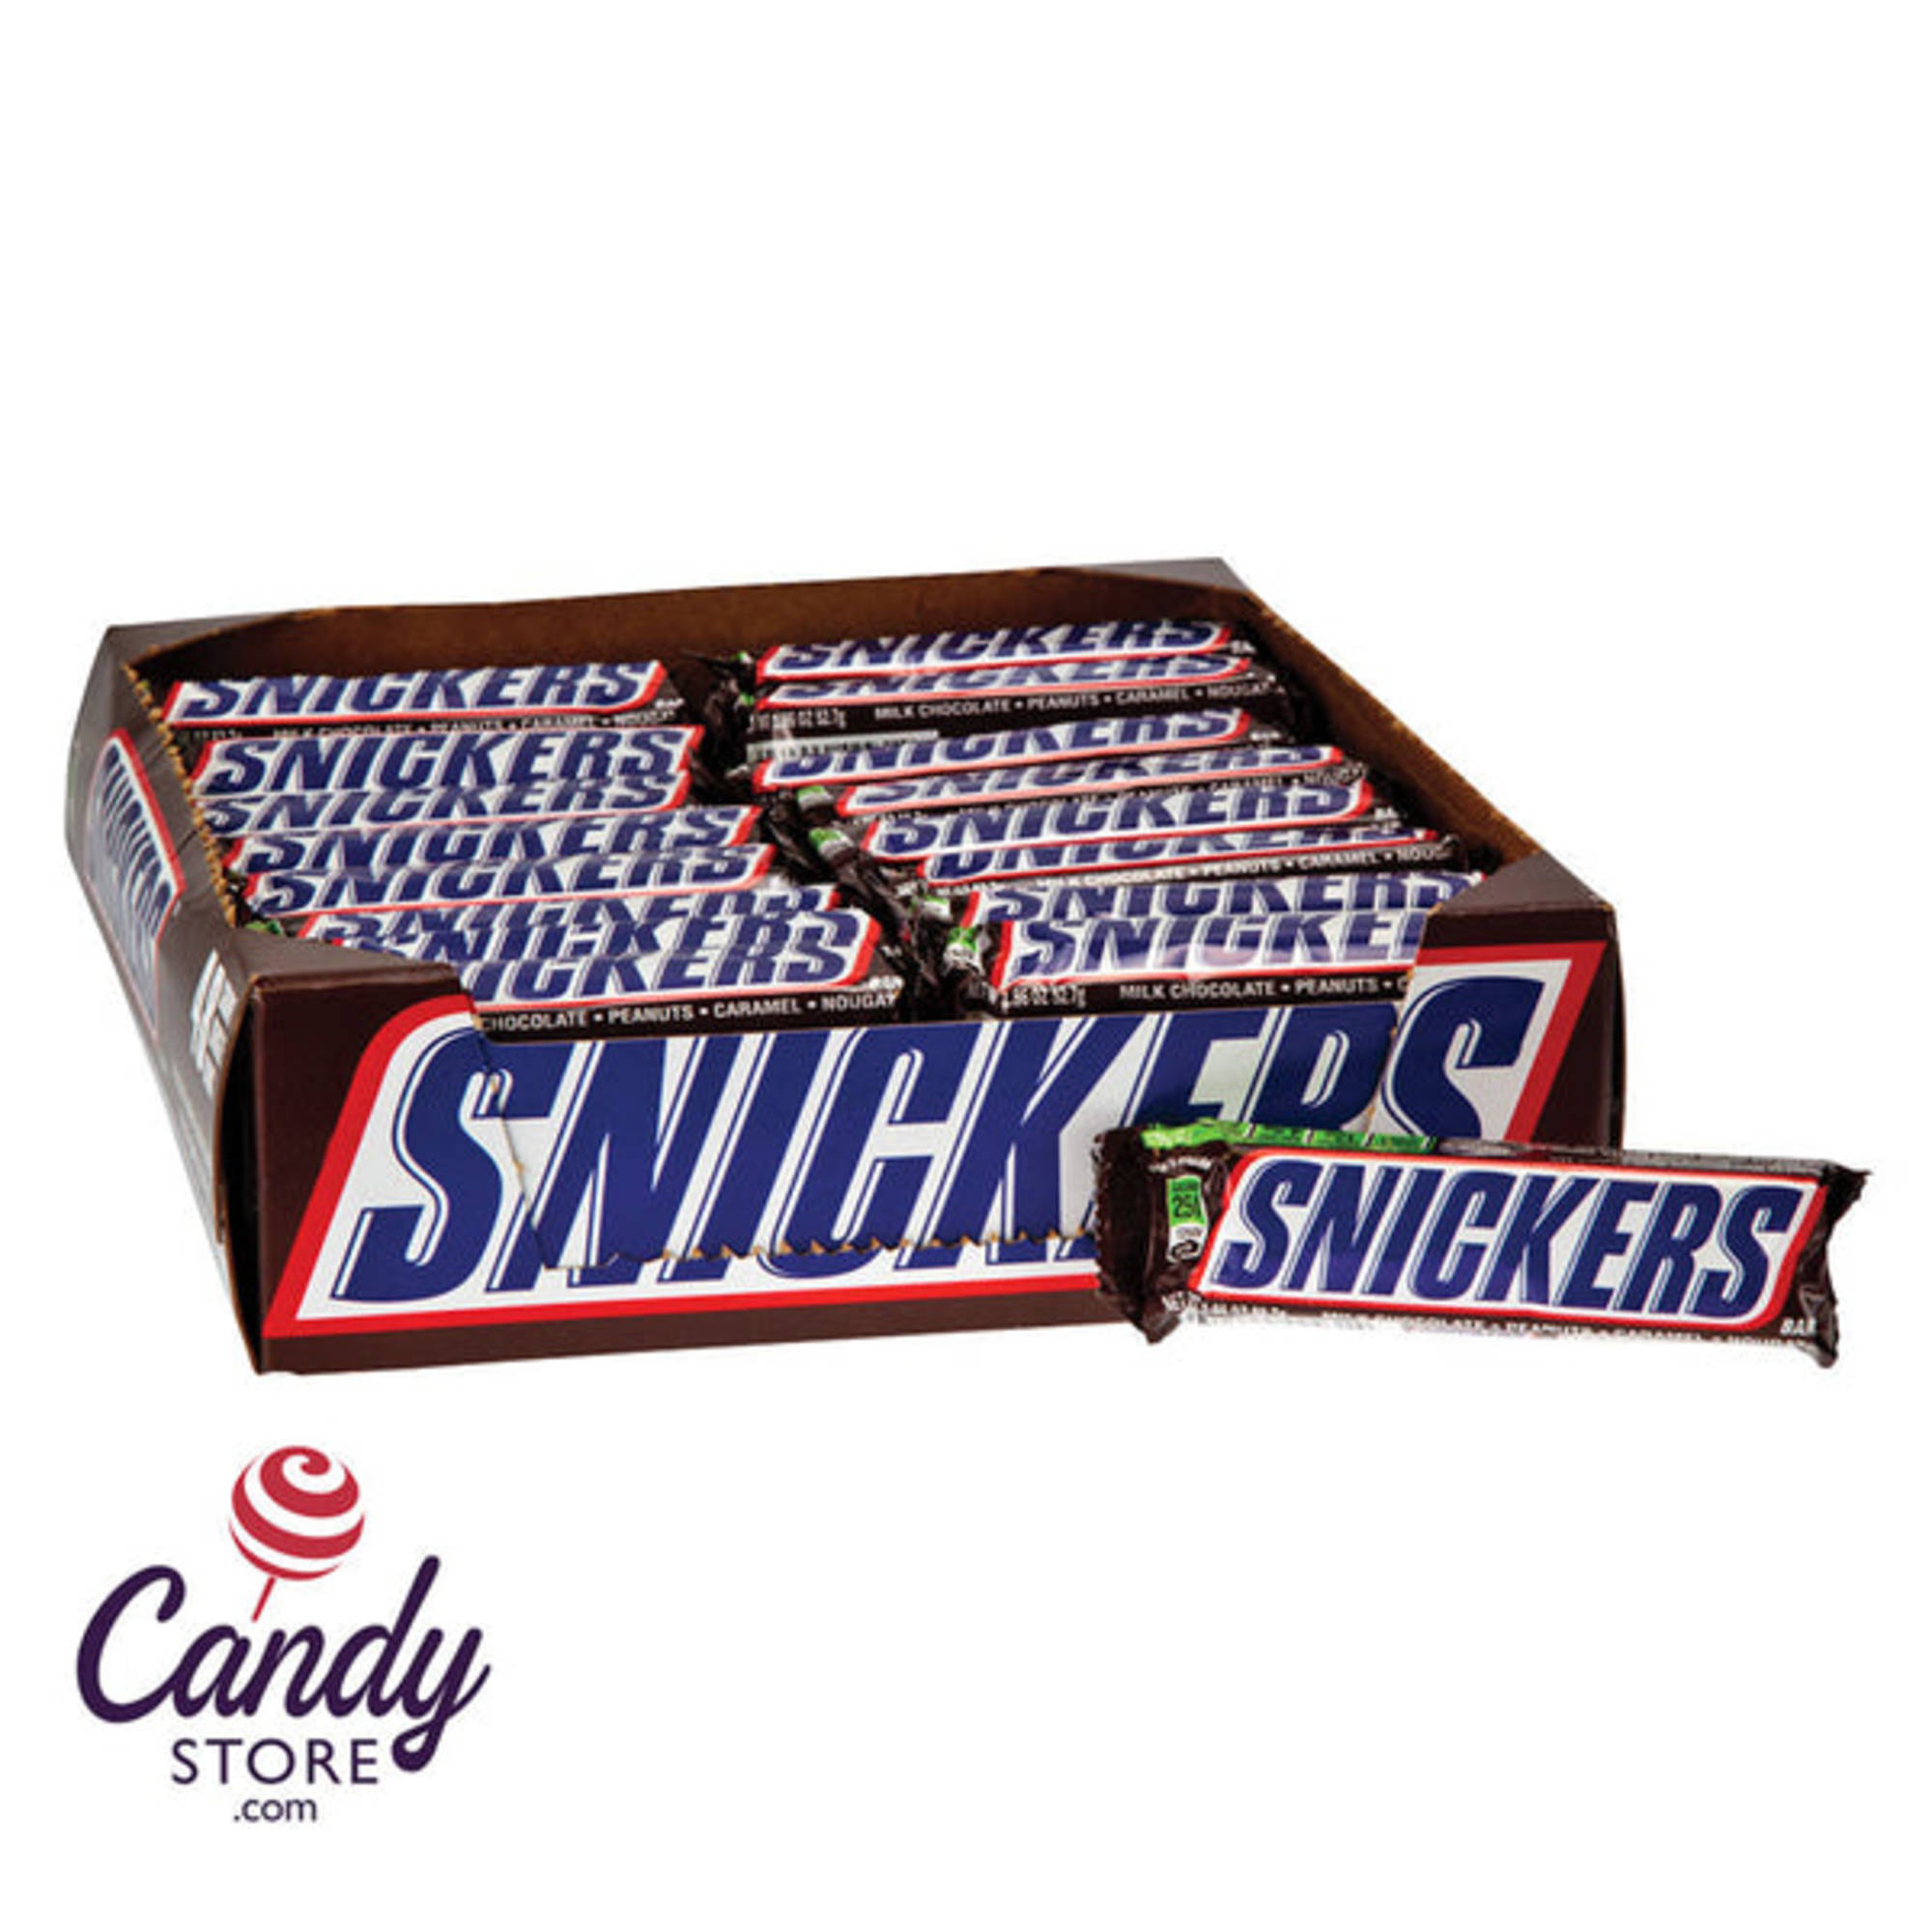 Save on Snickers Peanuts Caramel & Milk Chocolate Candy Bars Fun Size Order  Online Delivery